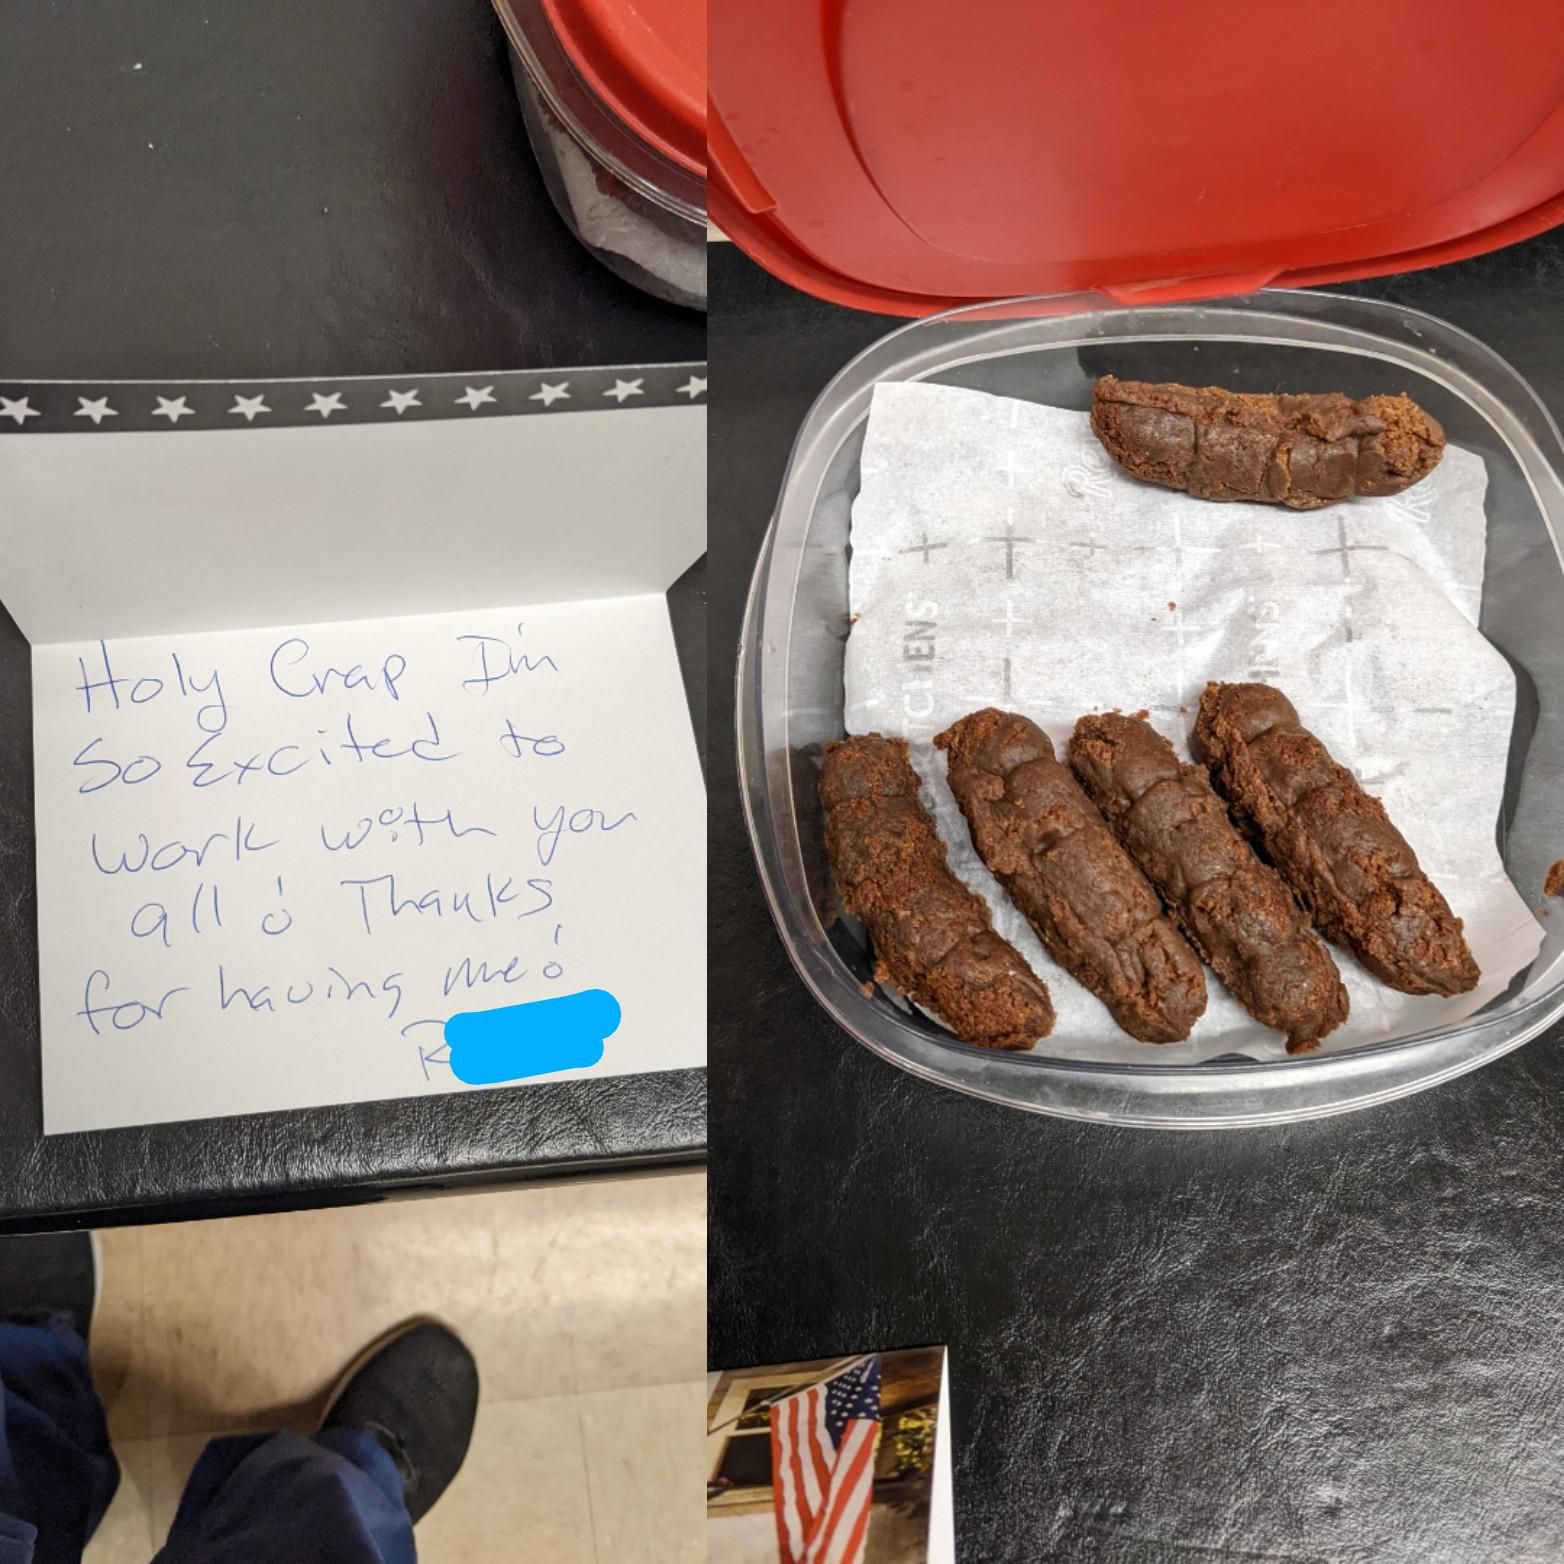 New employee starting today brought "brownies" in for everone with this note